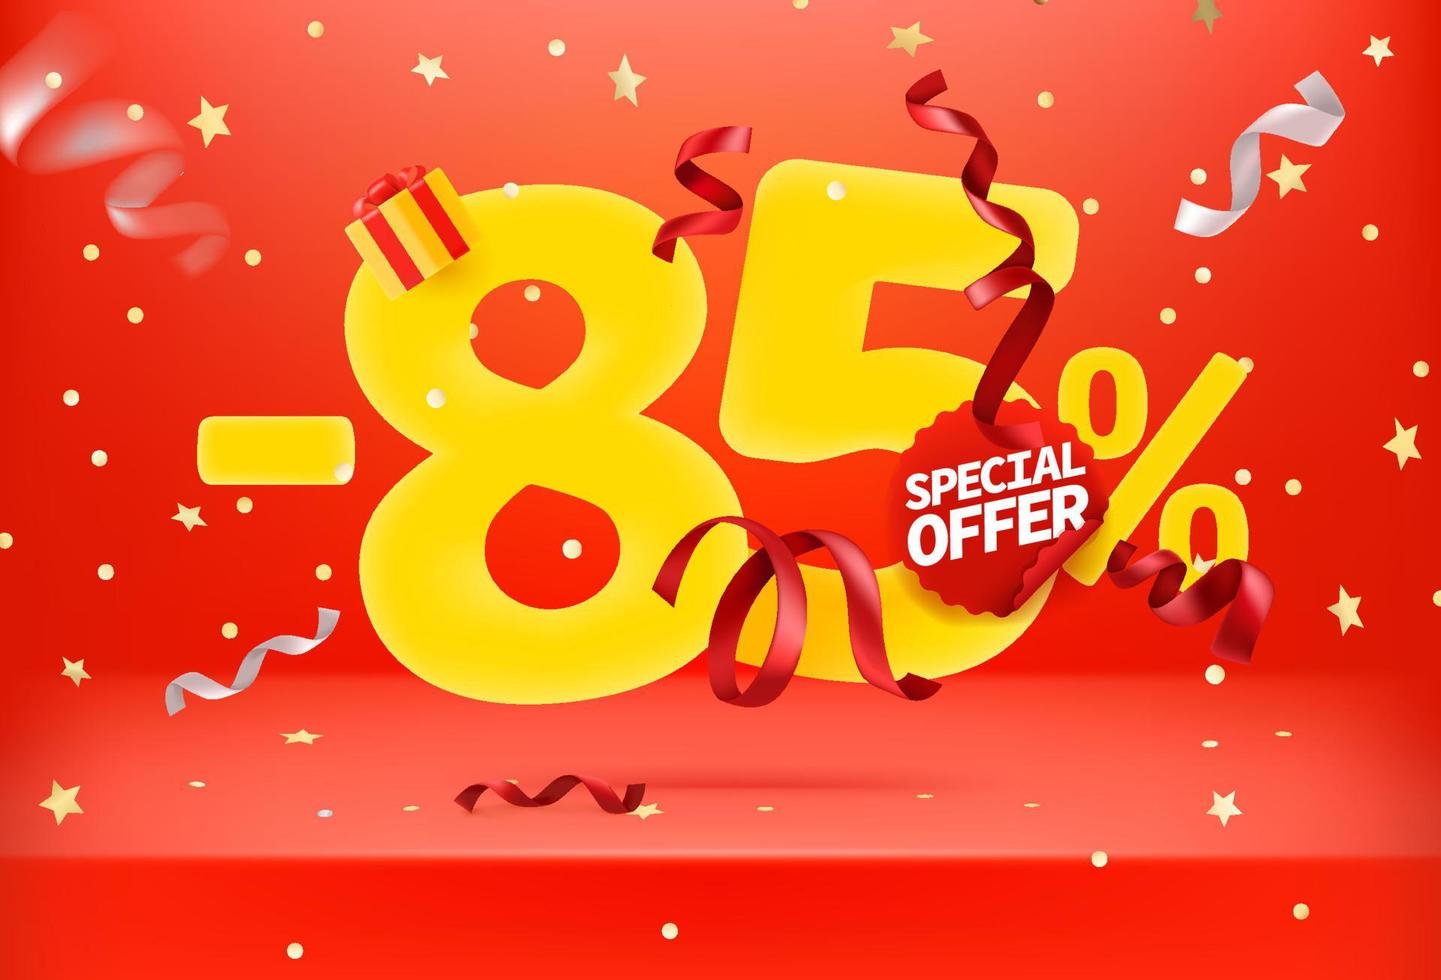 Eighty five percent sale off special offer vector promo banner